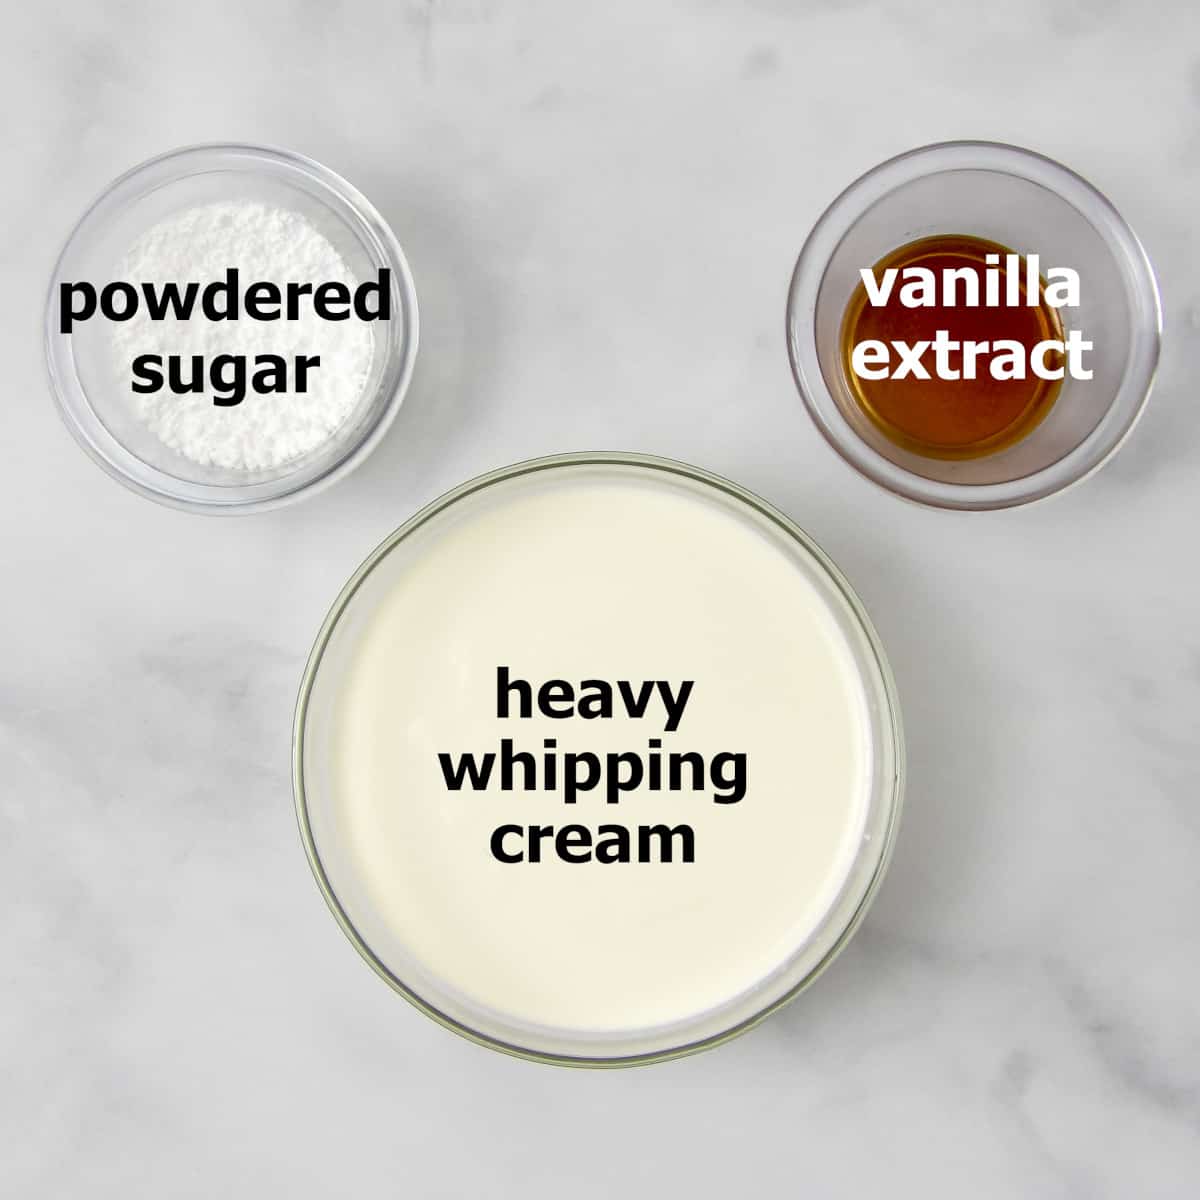 Ingredients for homemade whipped cream: heavy whipped cream, powdered sugar, and vanilla extract.